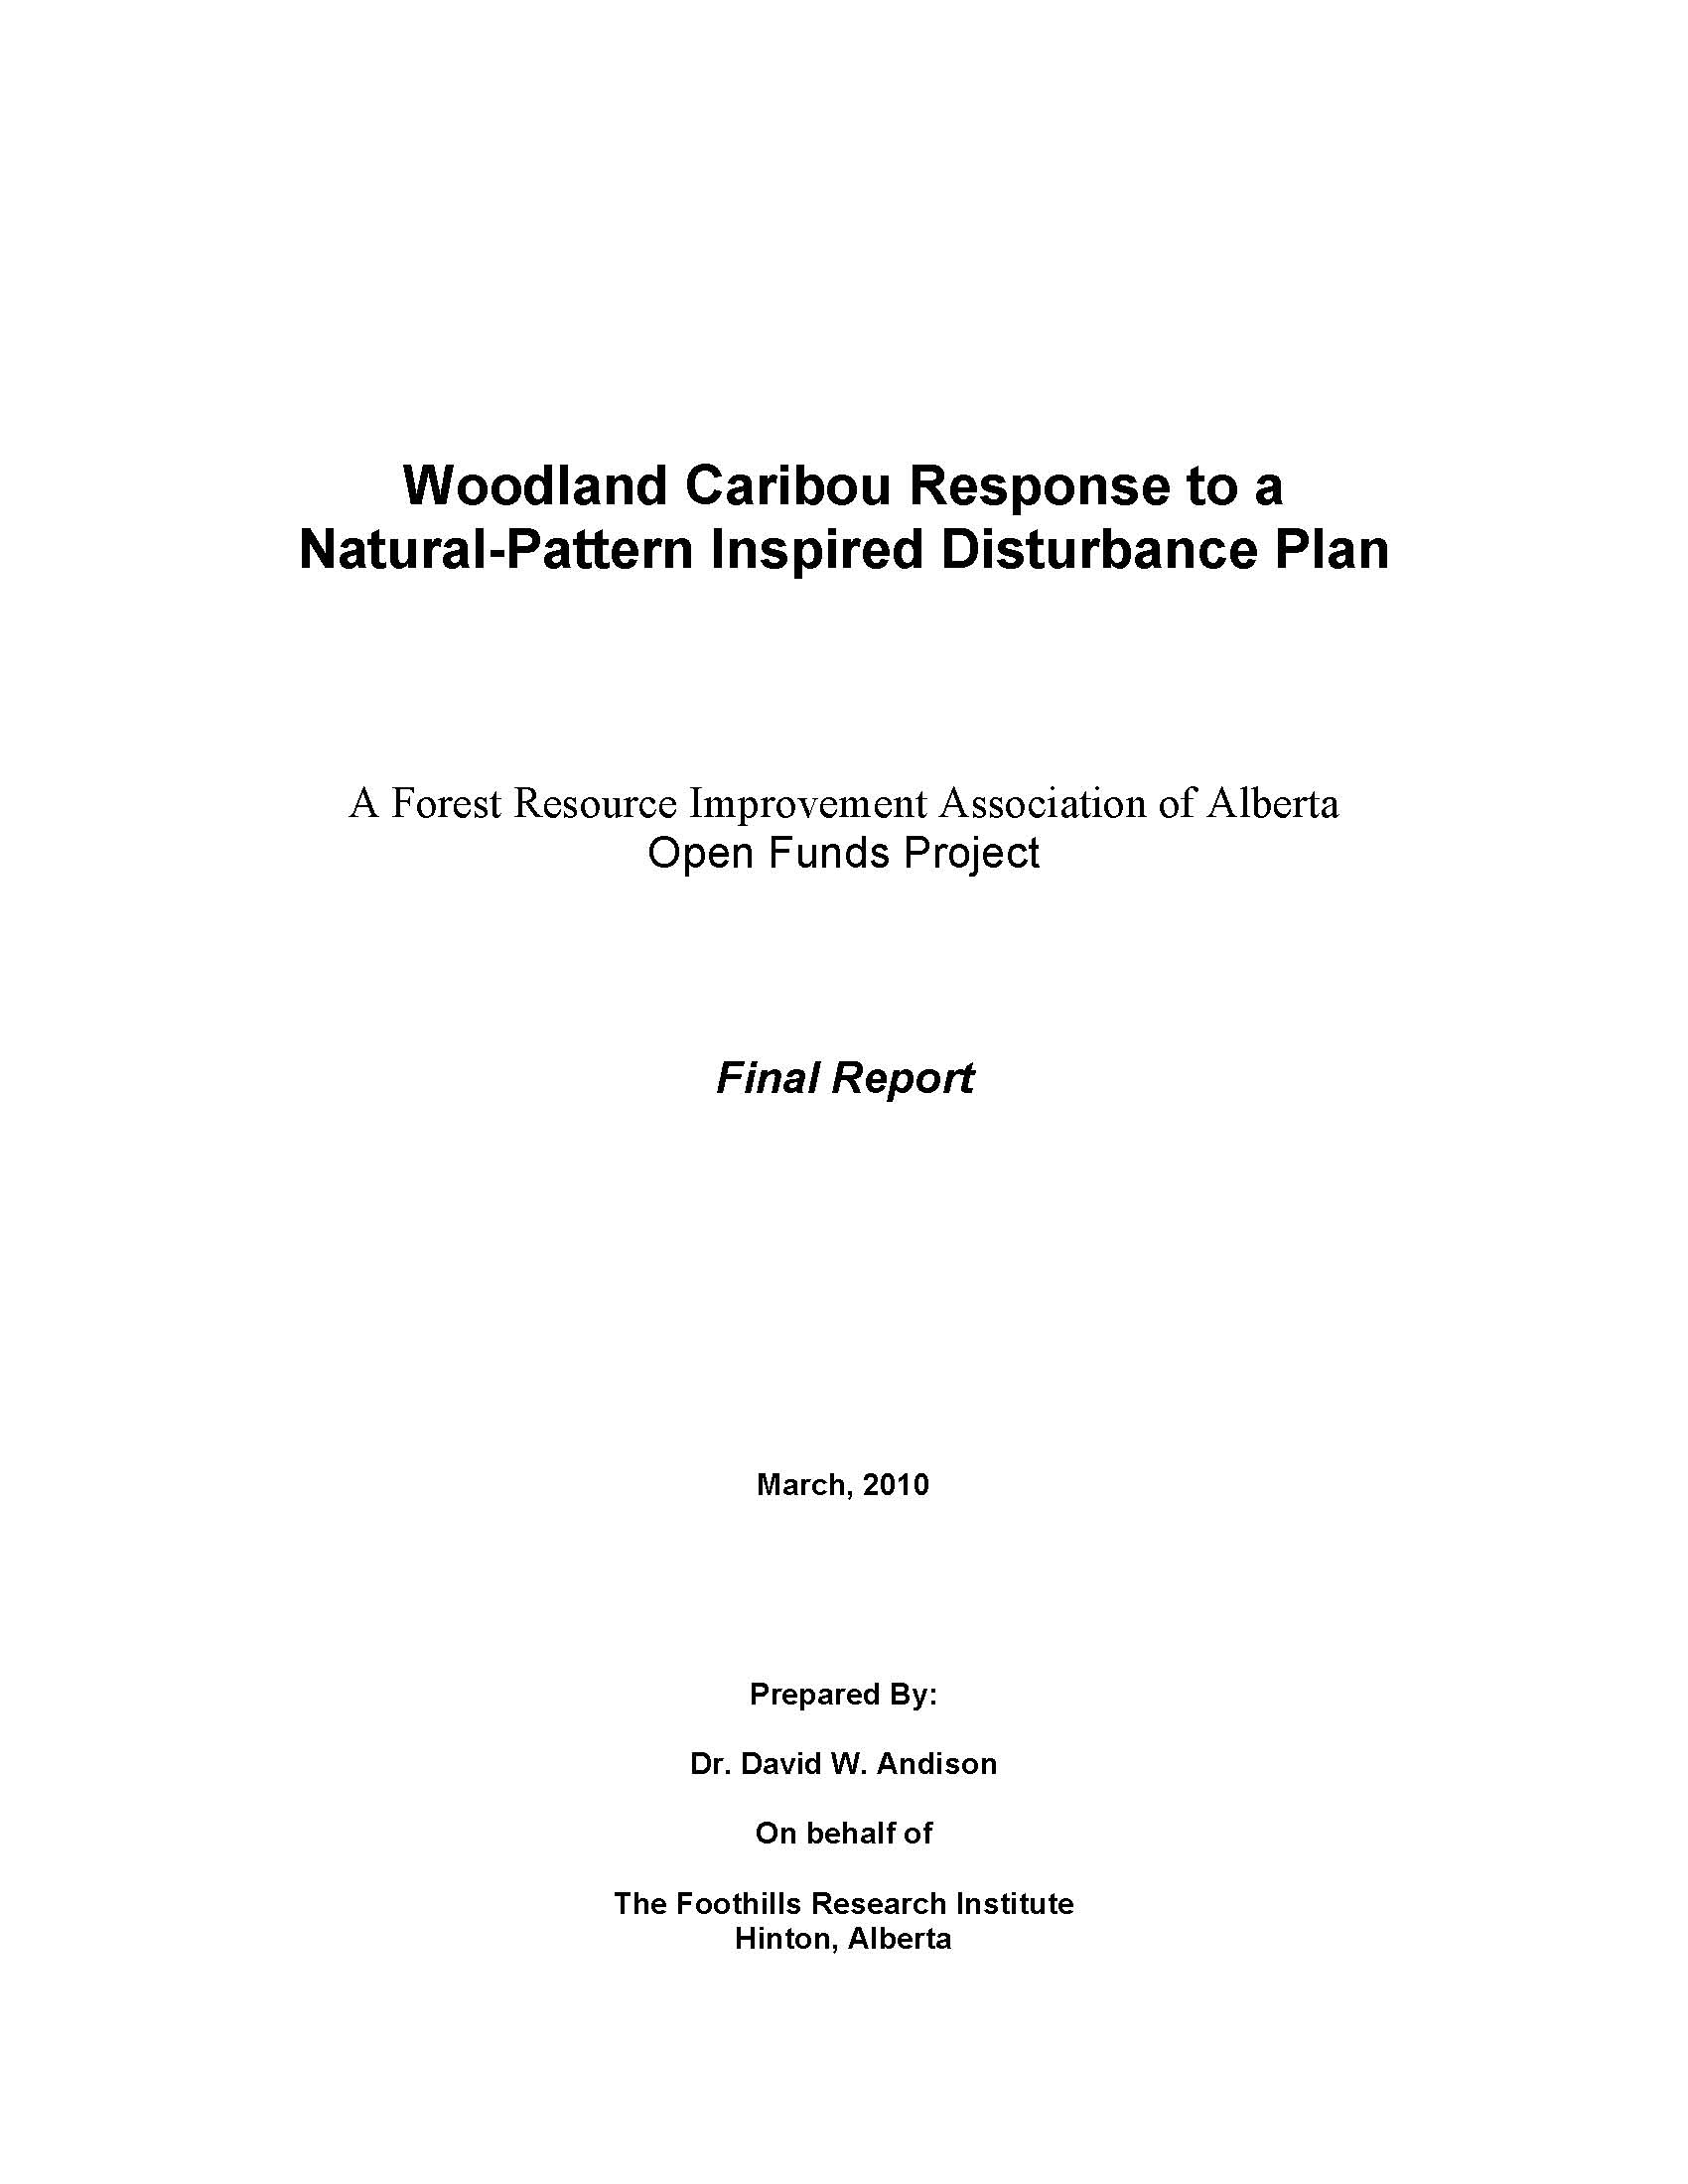 Woodland Caribou Response to a Natural-Pattern Inspired Disturbance Plan